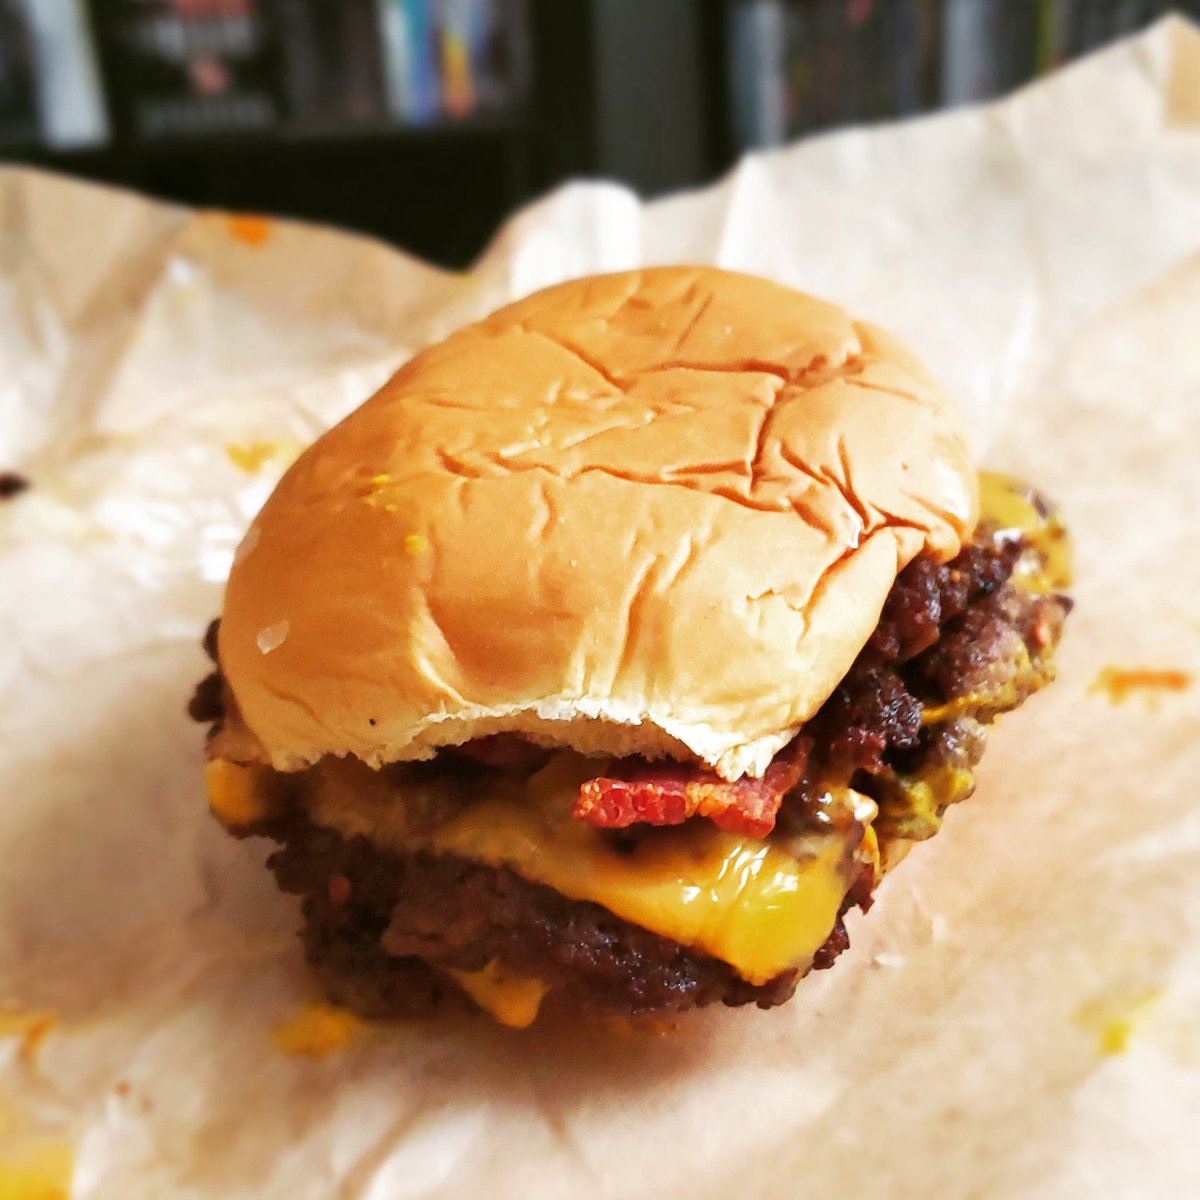 If not the best burger in Richmond, Cobra Burger is certainly in the running! GLORIOUS. Get to the burger hole!
#CobraBurger #rvaburgers #bestburger #rvafood